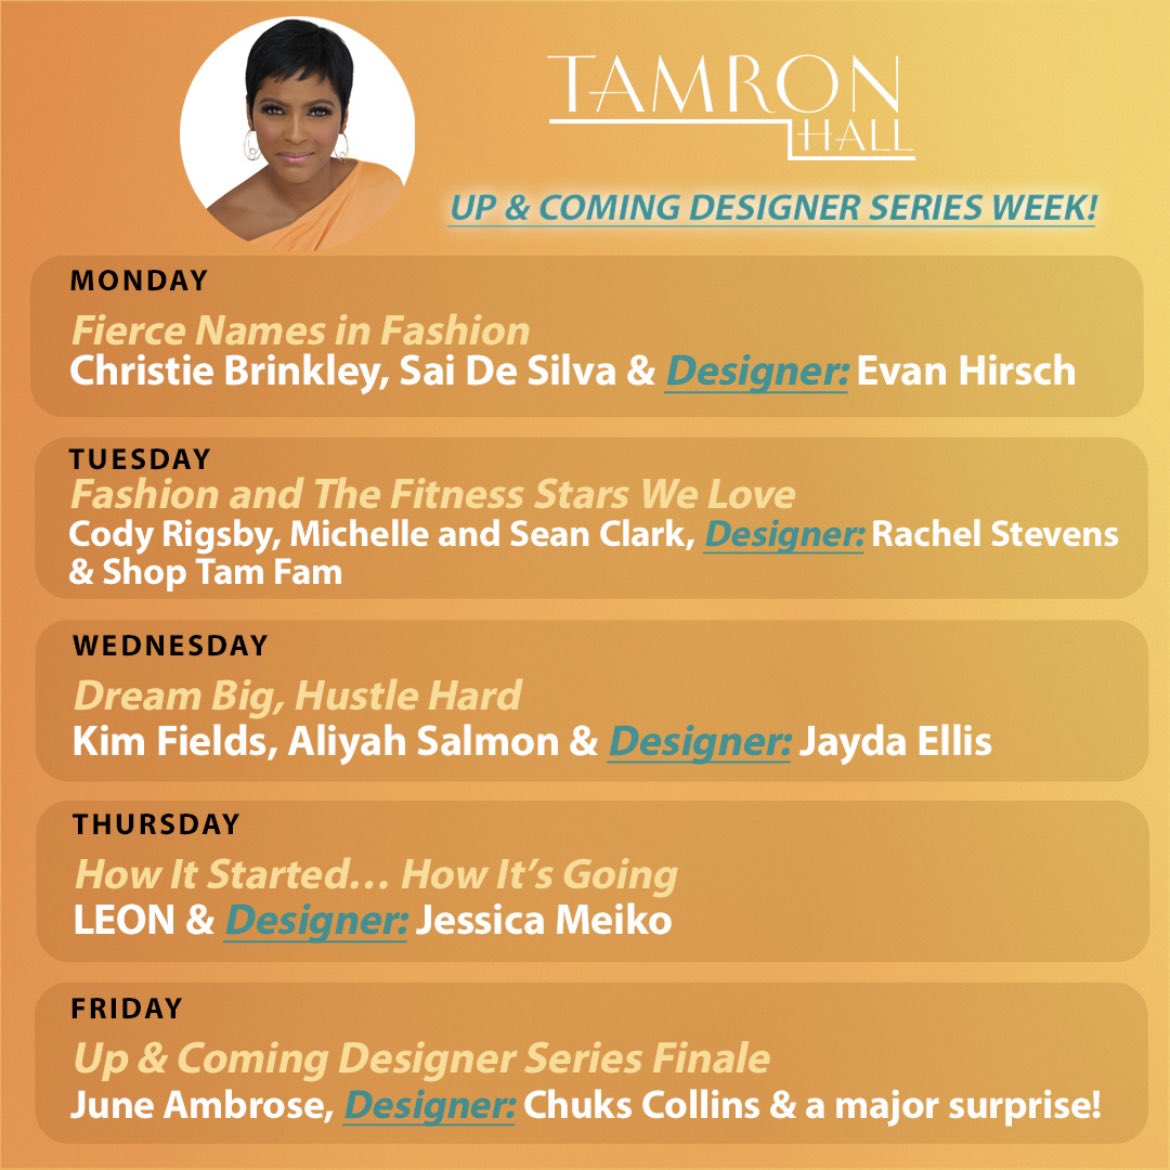 THIS WEEK ON “Tamron Hall”: MON: Christie Brinkley, Sai De Silva and Evan Hirsch TUES: Cody Rigsby, Michelle and Sean Clark, Rachel Stevens and Shop Tam Fam WED: @KimVFields, Aliyah Salmon and Jayda Ellis THURS: @justleon and Jessica Meiko FRI: @juneAmbrose, Chuks Collins and a